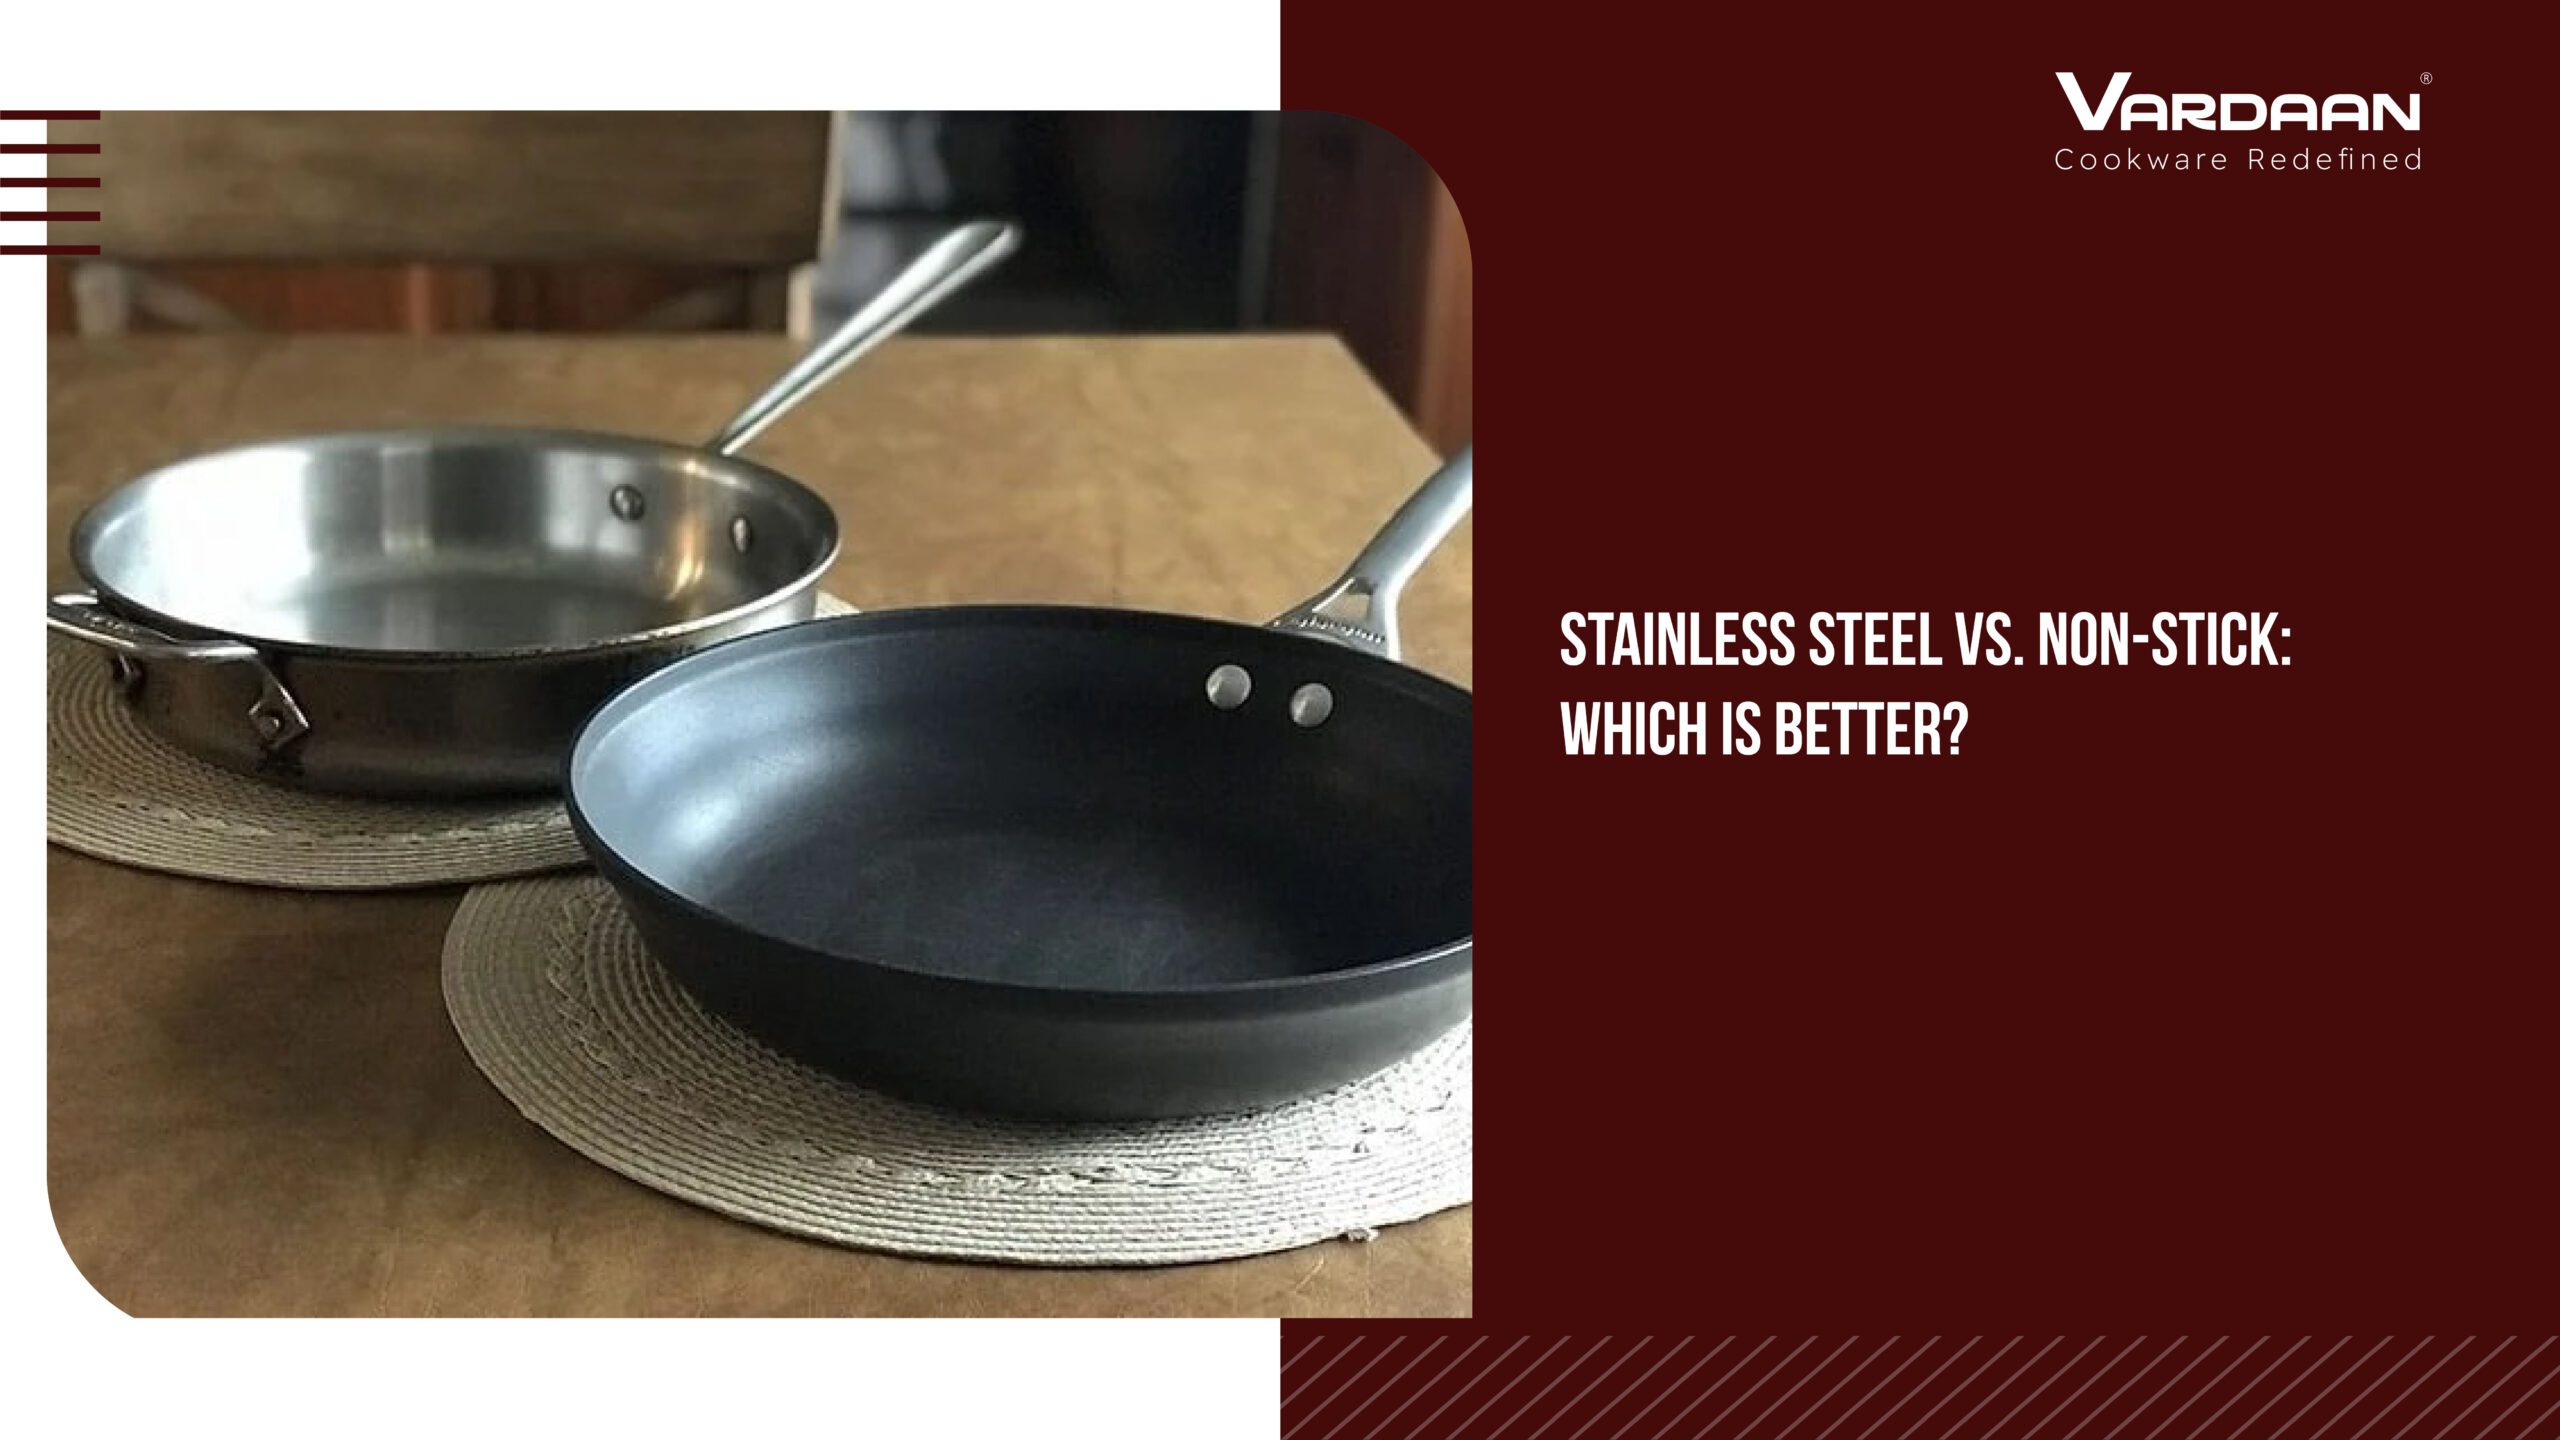 Stainless Steel vs. Non-Stick: Which is Better?